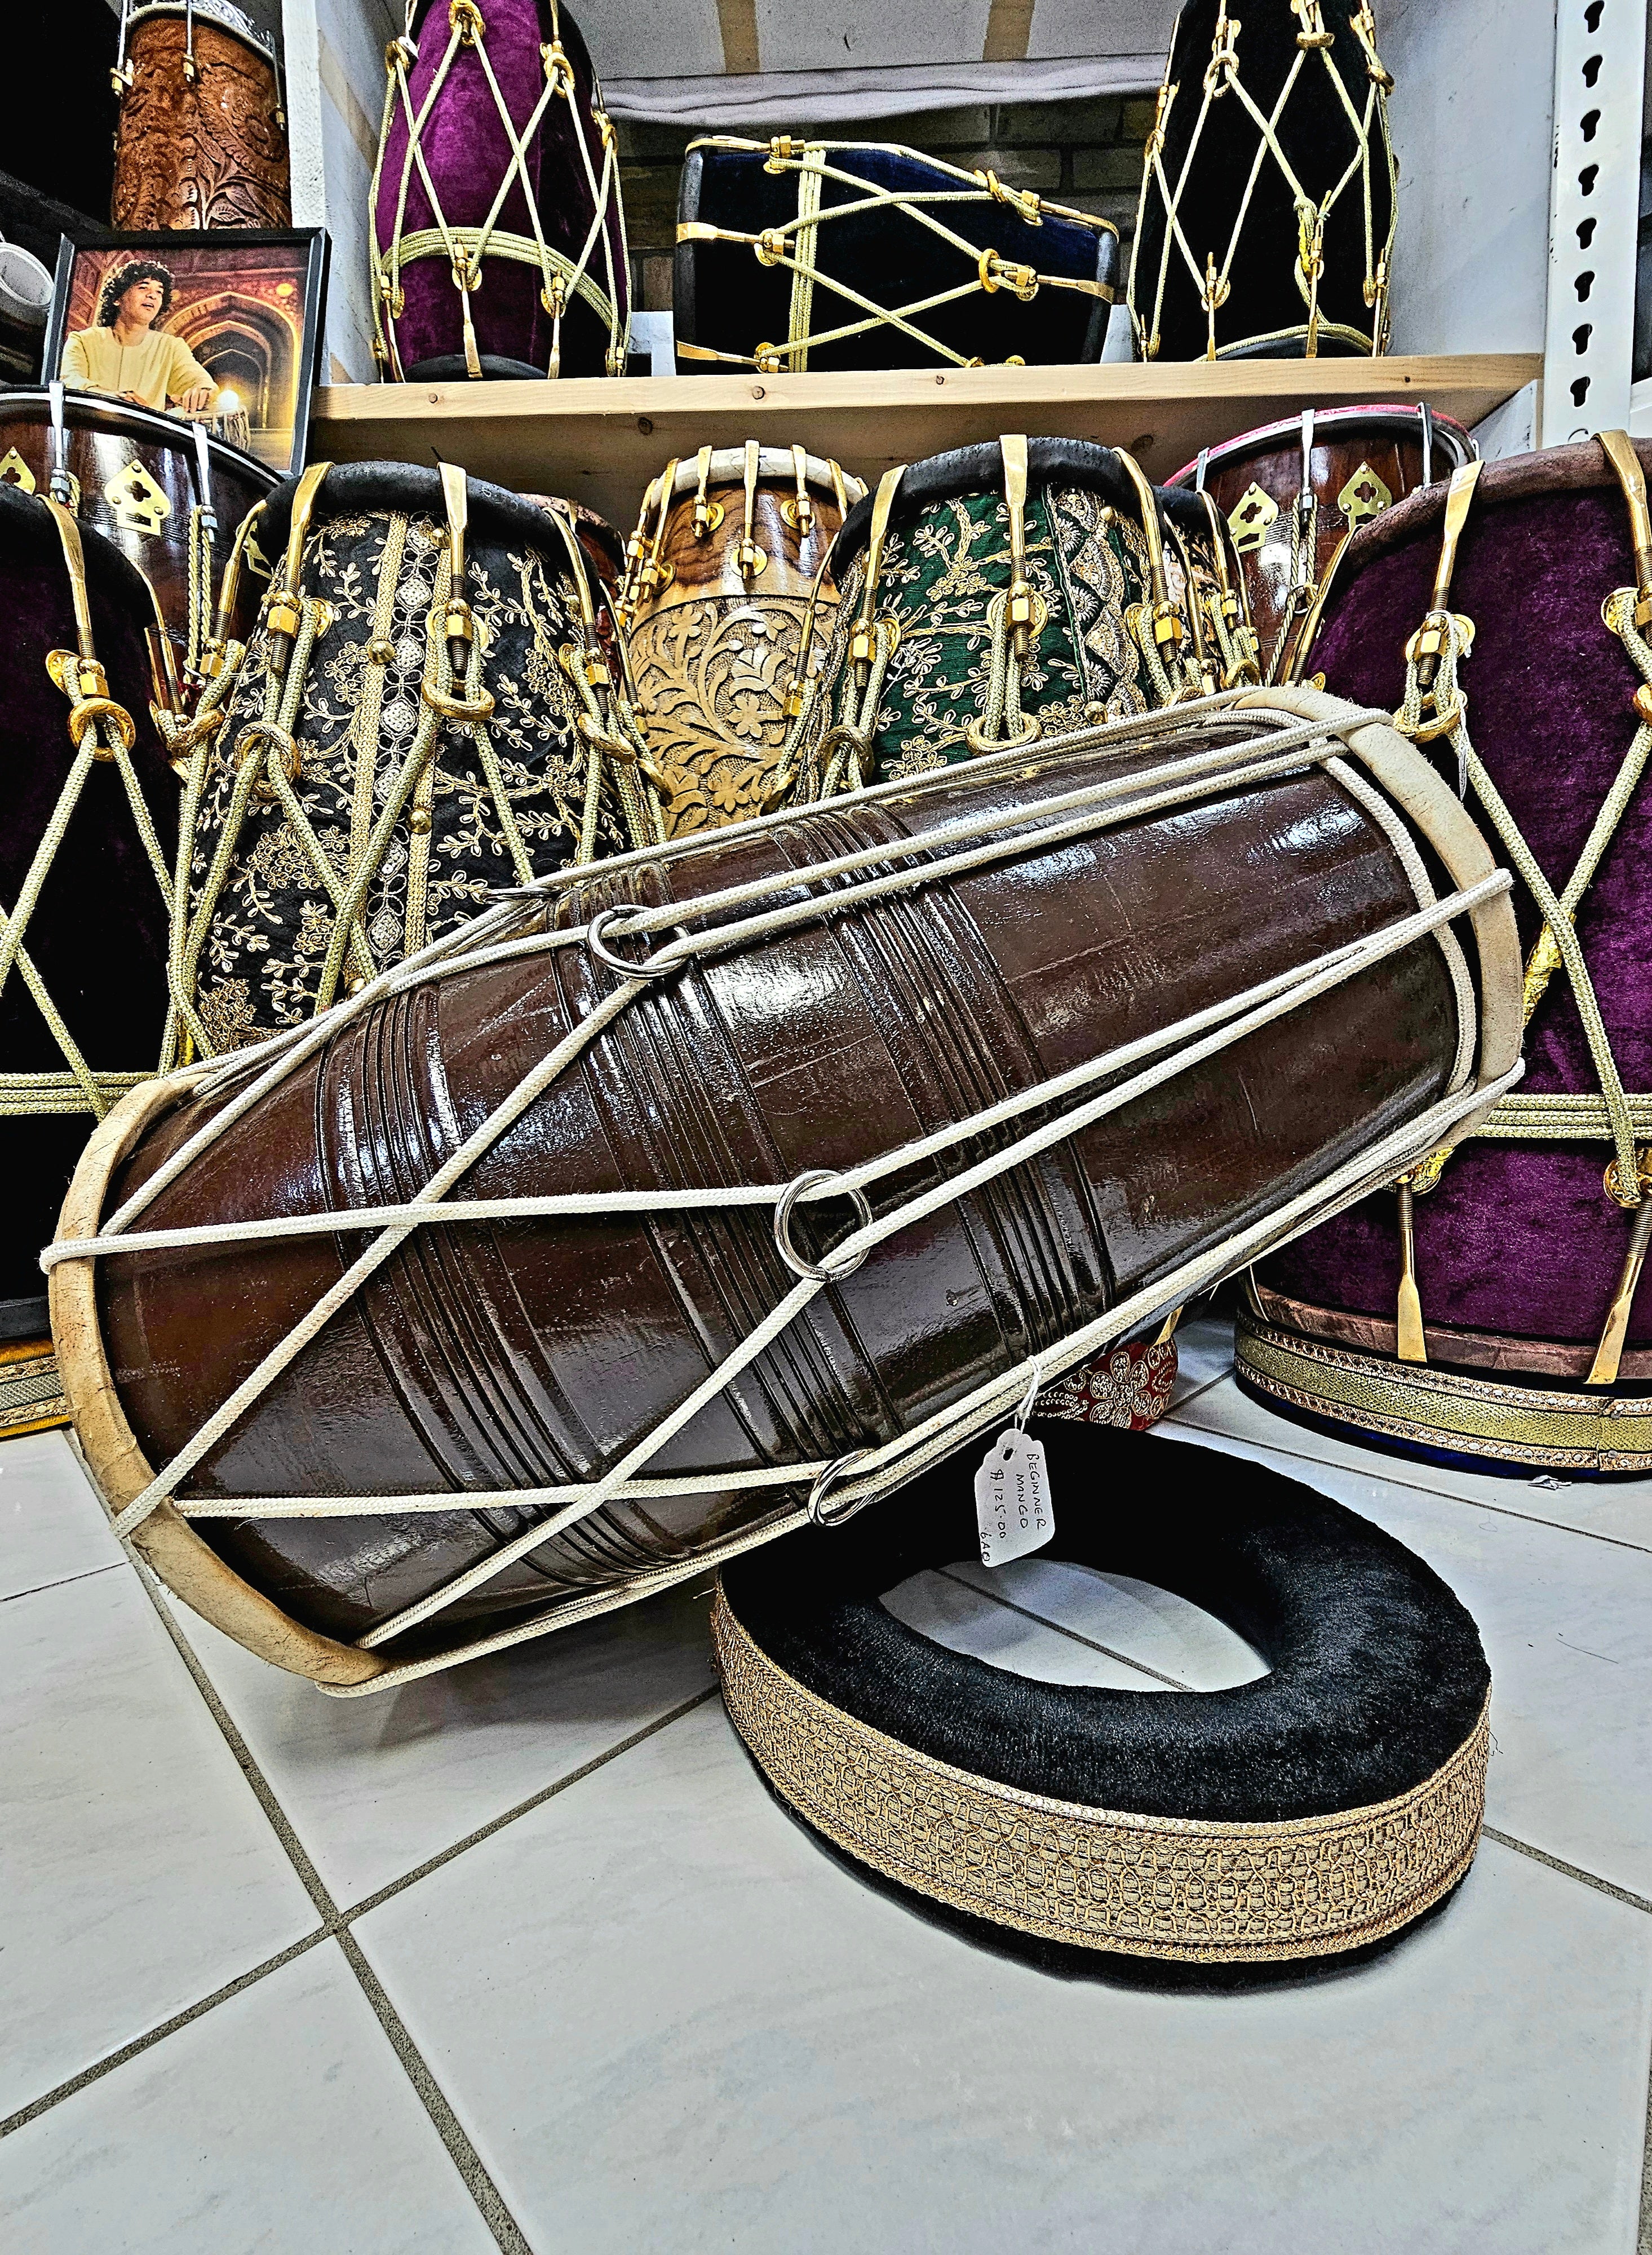 Natural Harmony: Brown Mango Wood Student Quality Roped Dholak